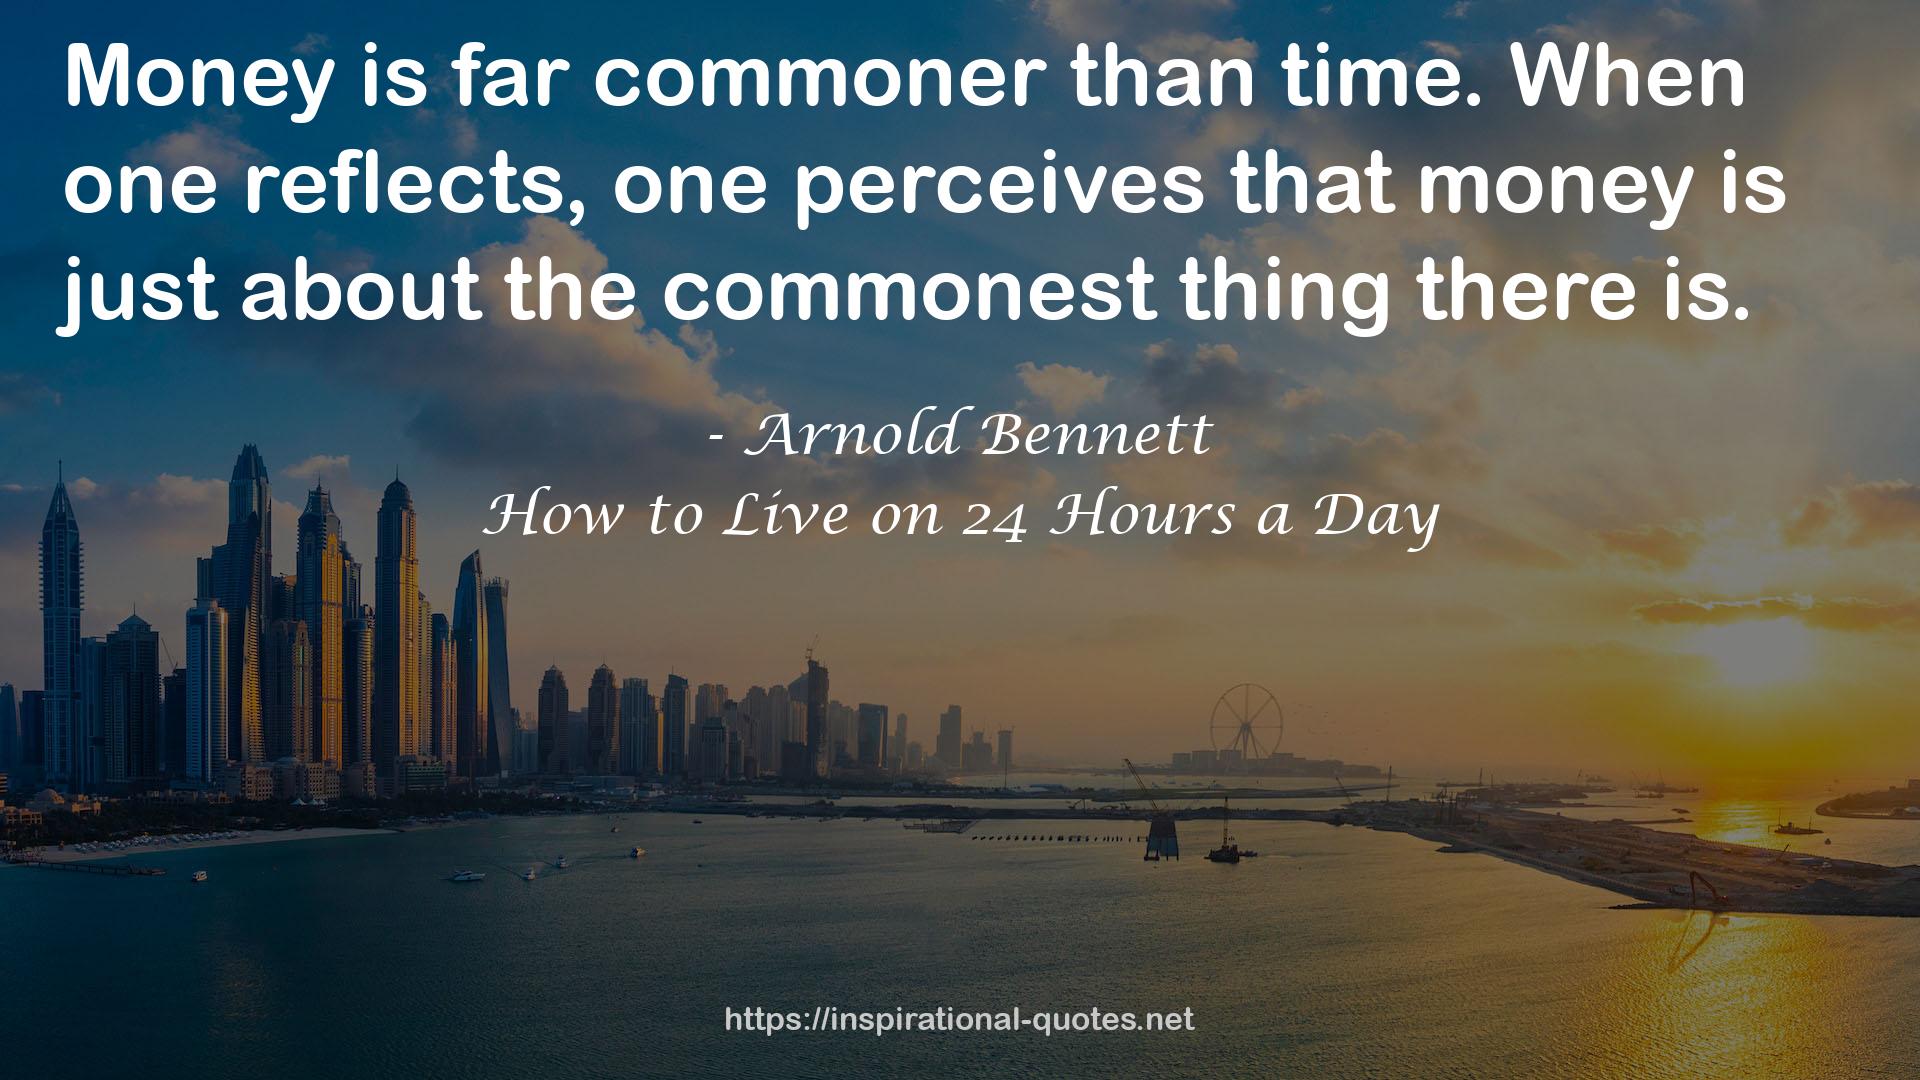 How to Live on 24 Hours a Day QUOTES